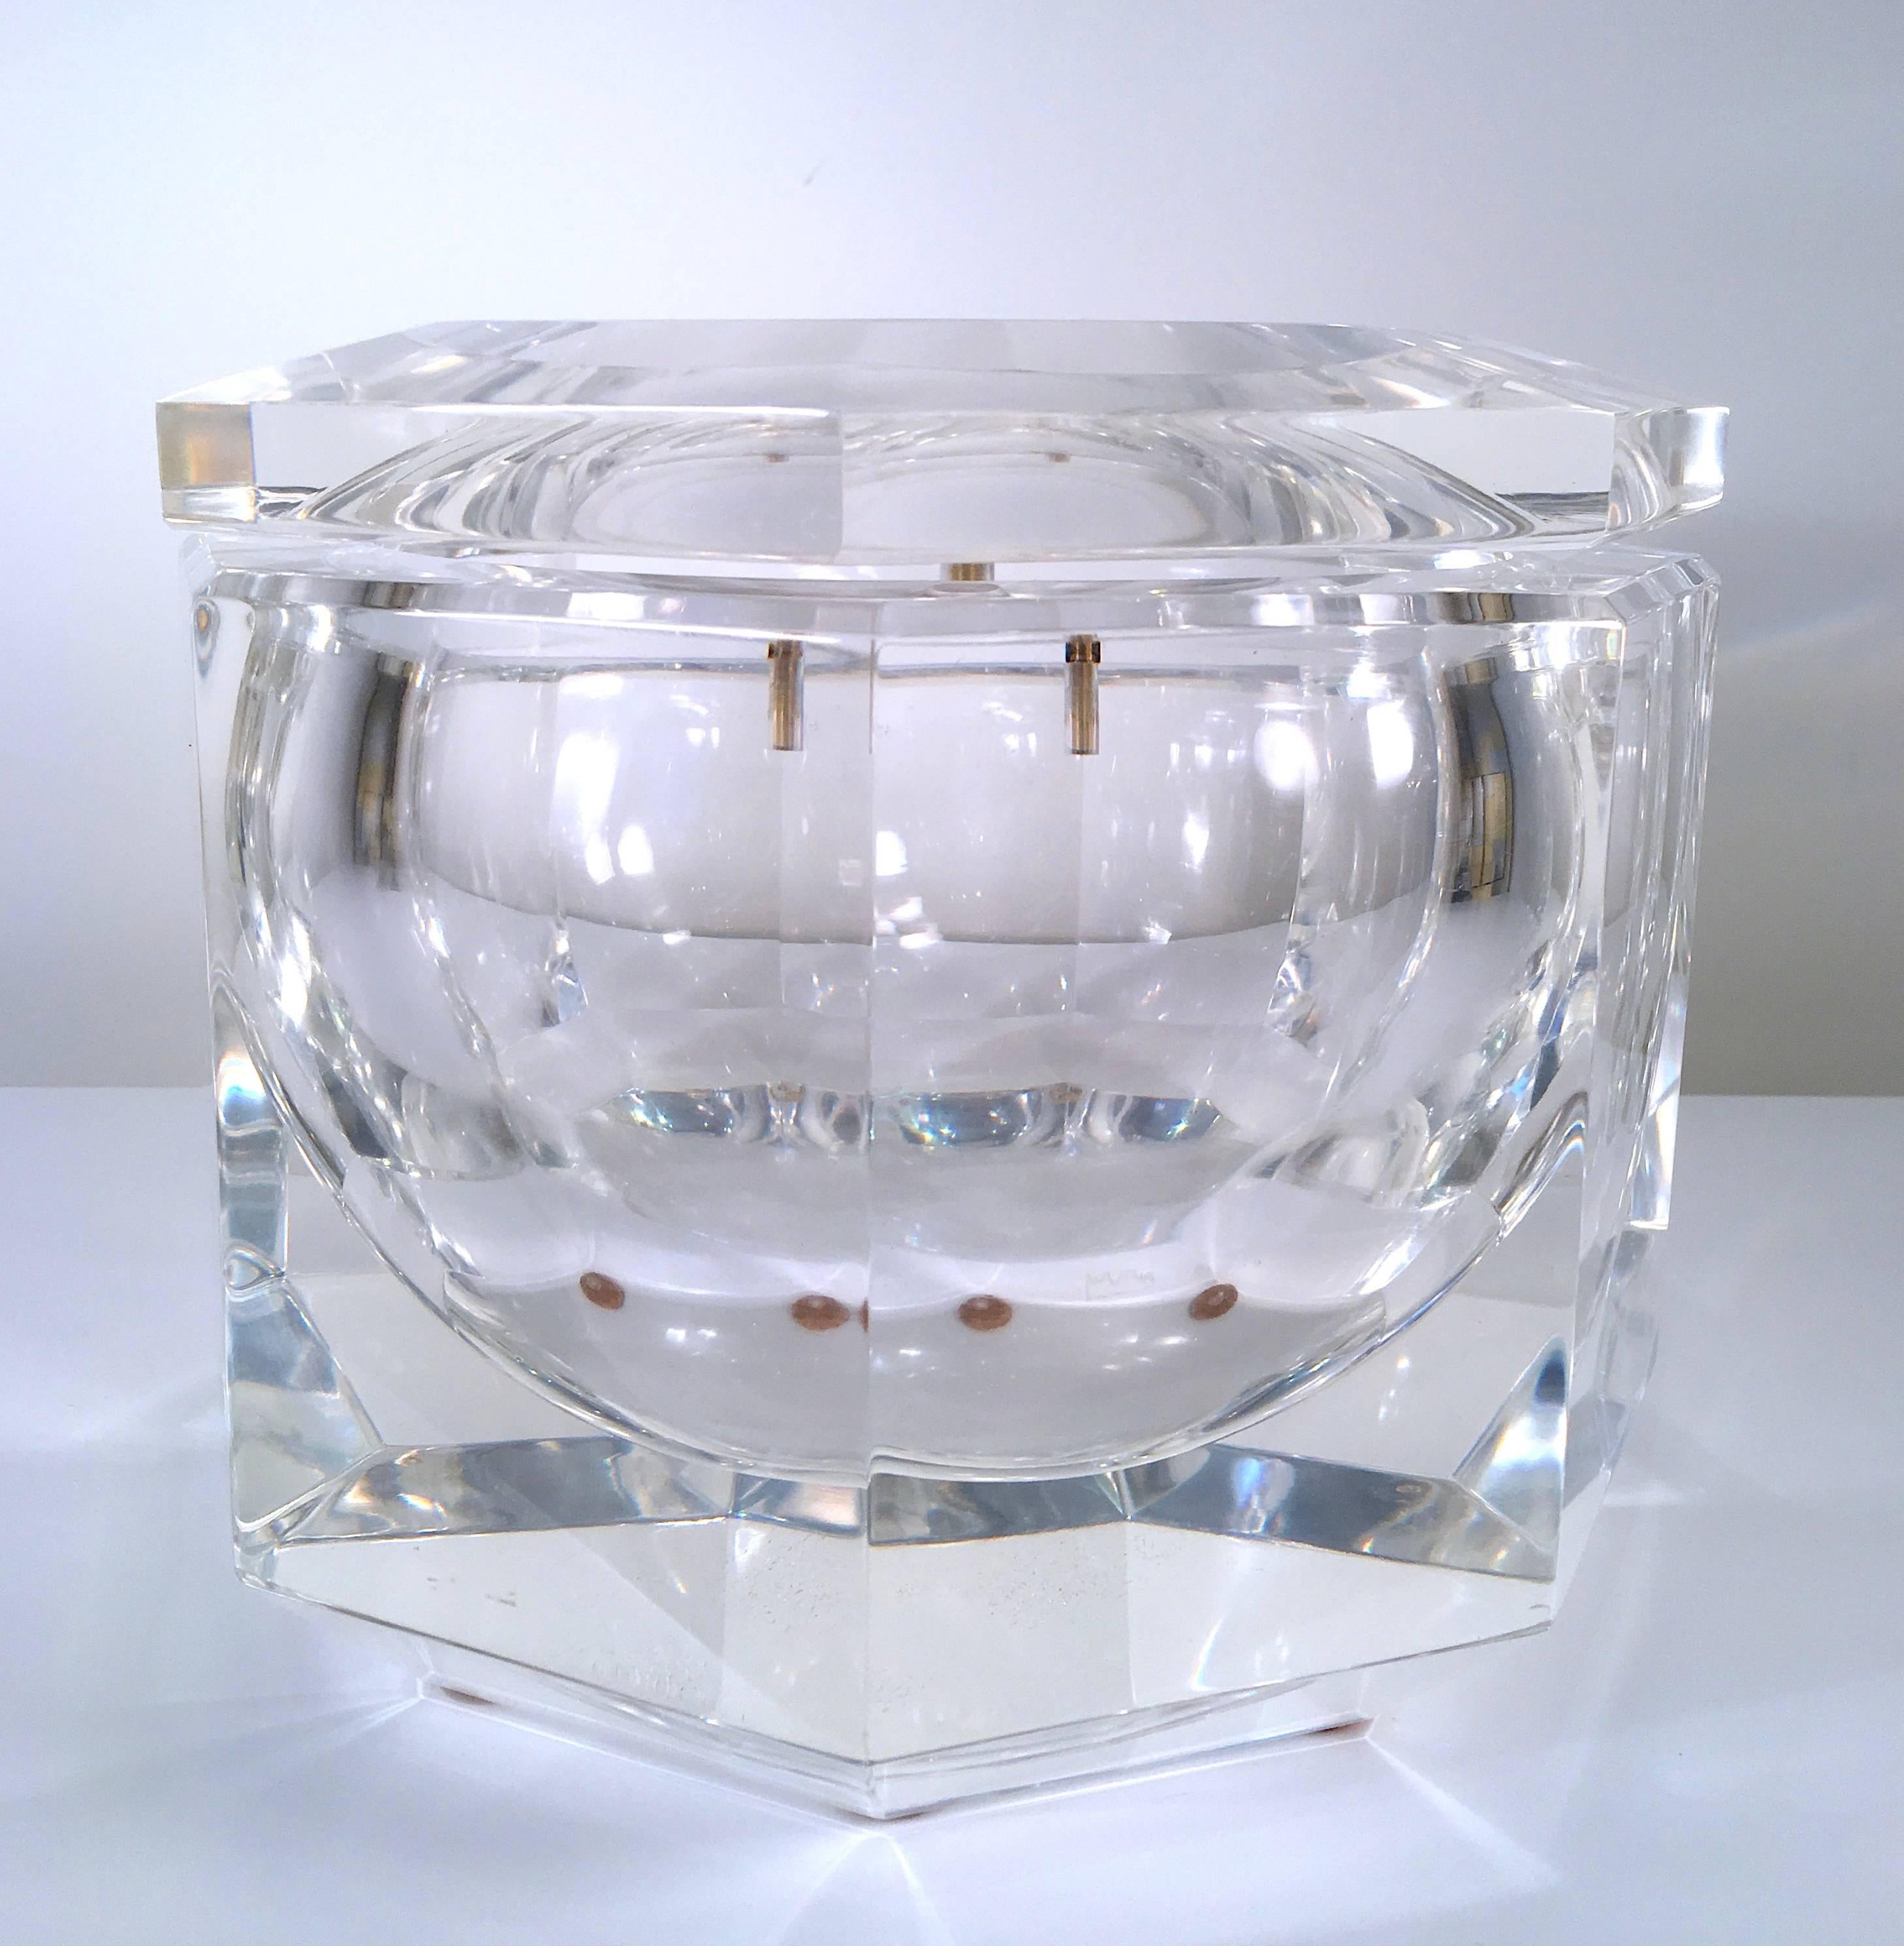 Faceted Lucite box with a sparkly gem like quality and a pivoting top. This design piece was presented by Carole Stupell in the United States. Please contact for location. 